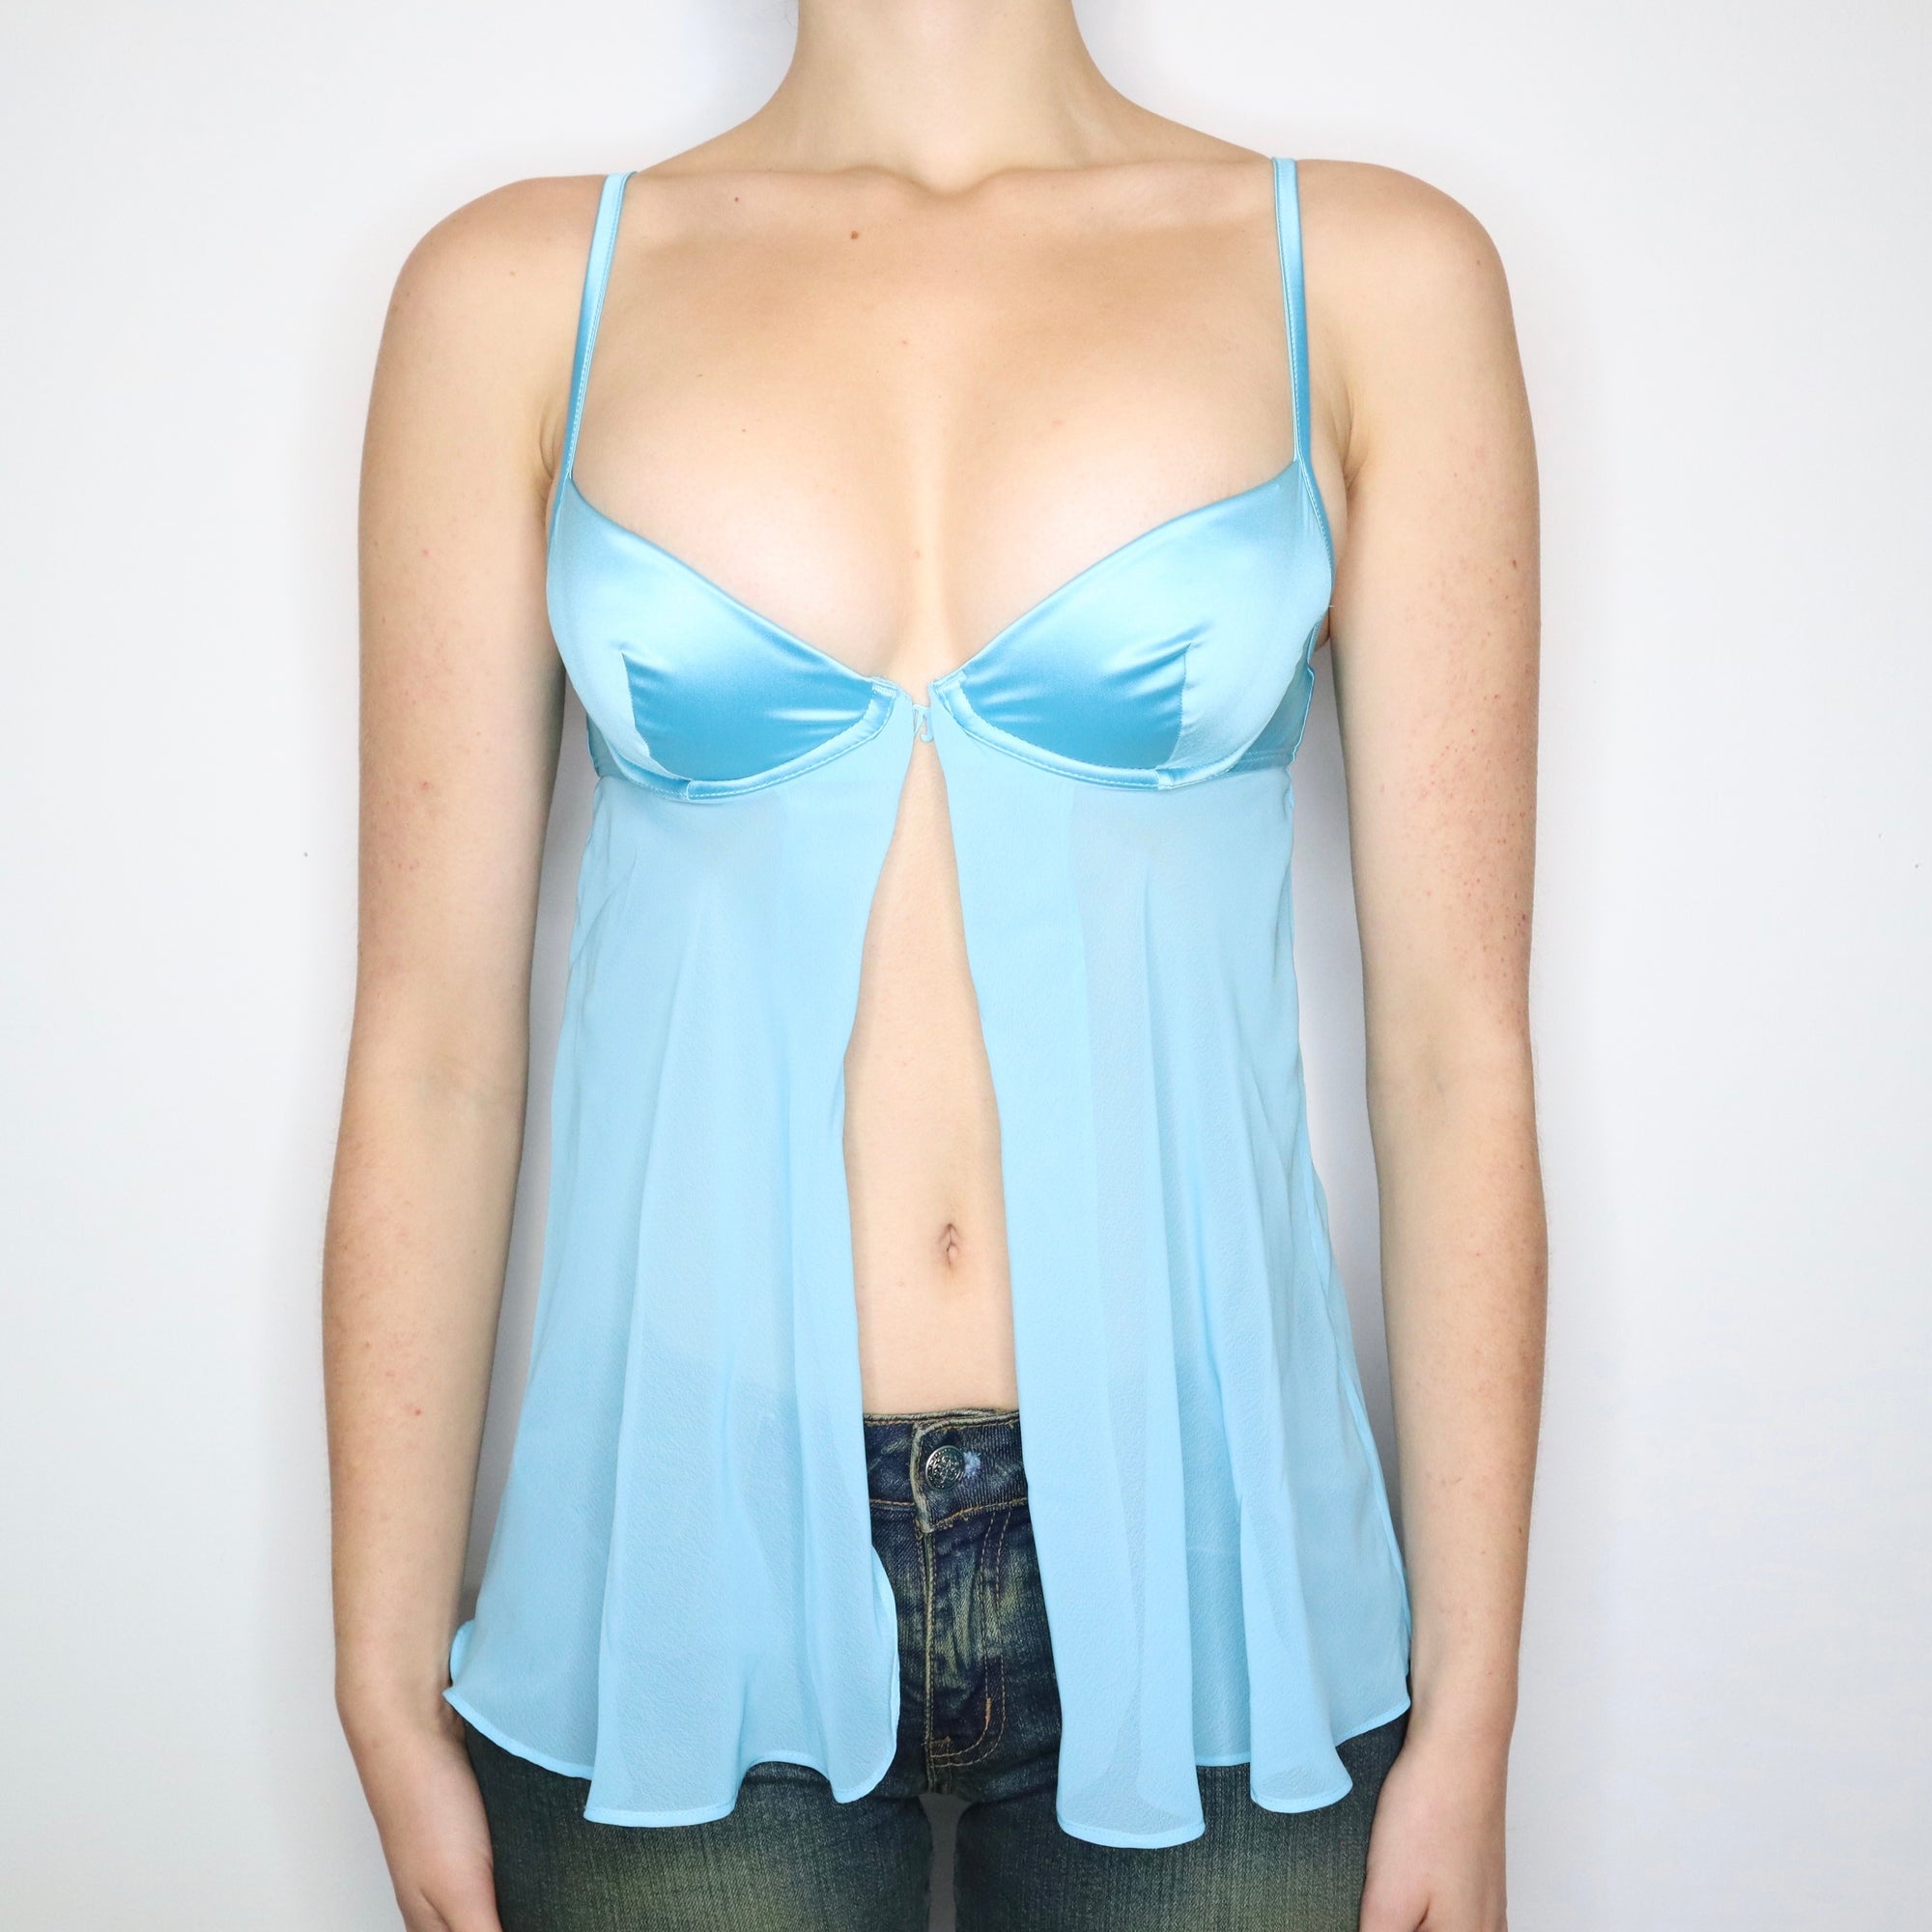 Vintage Early 2000s Sky Blue Bustier Babydoll Top